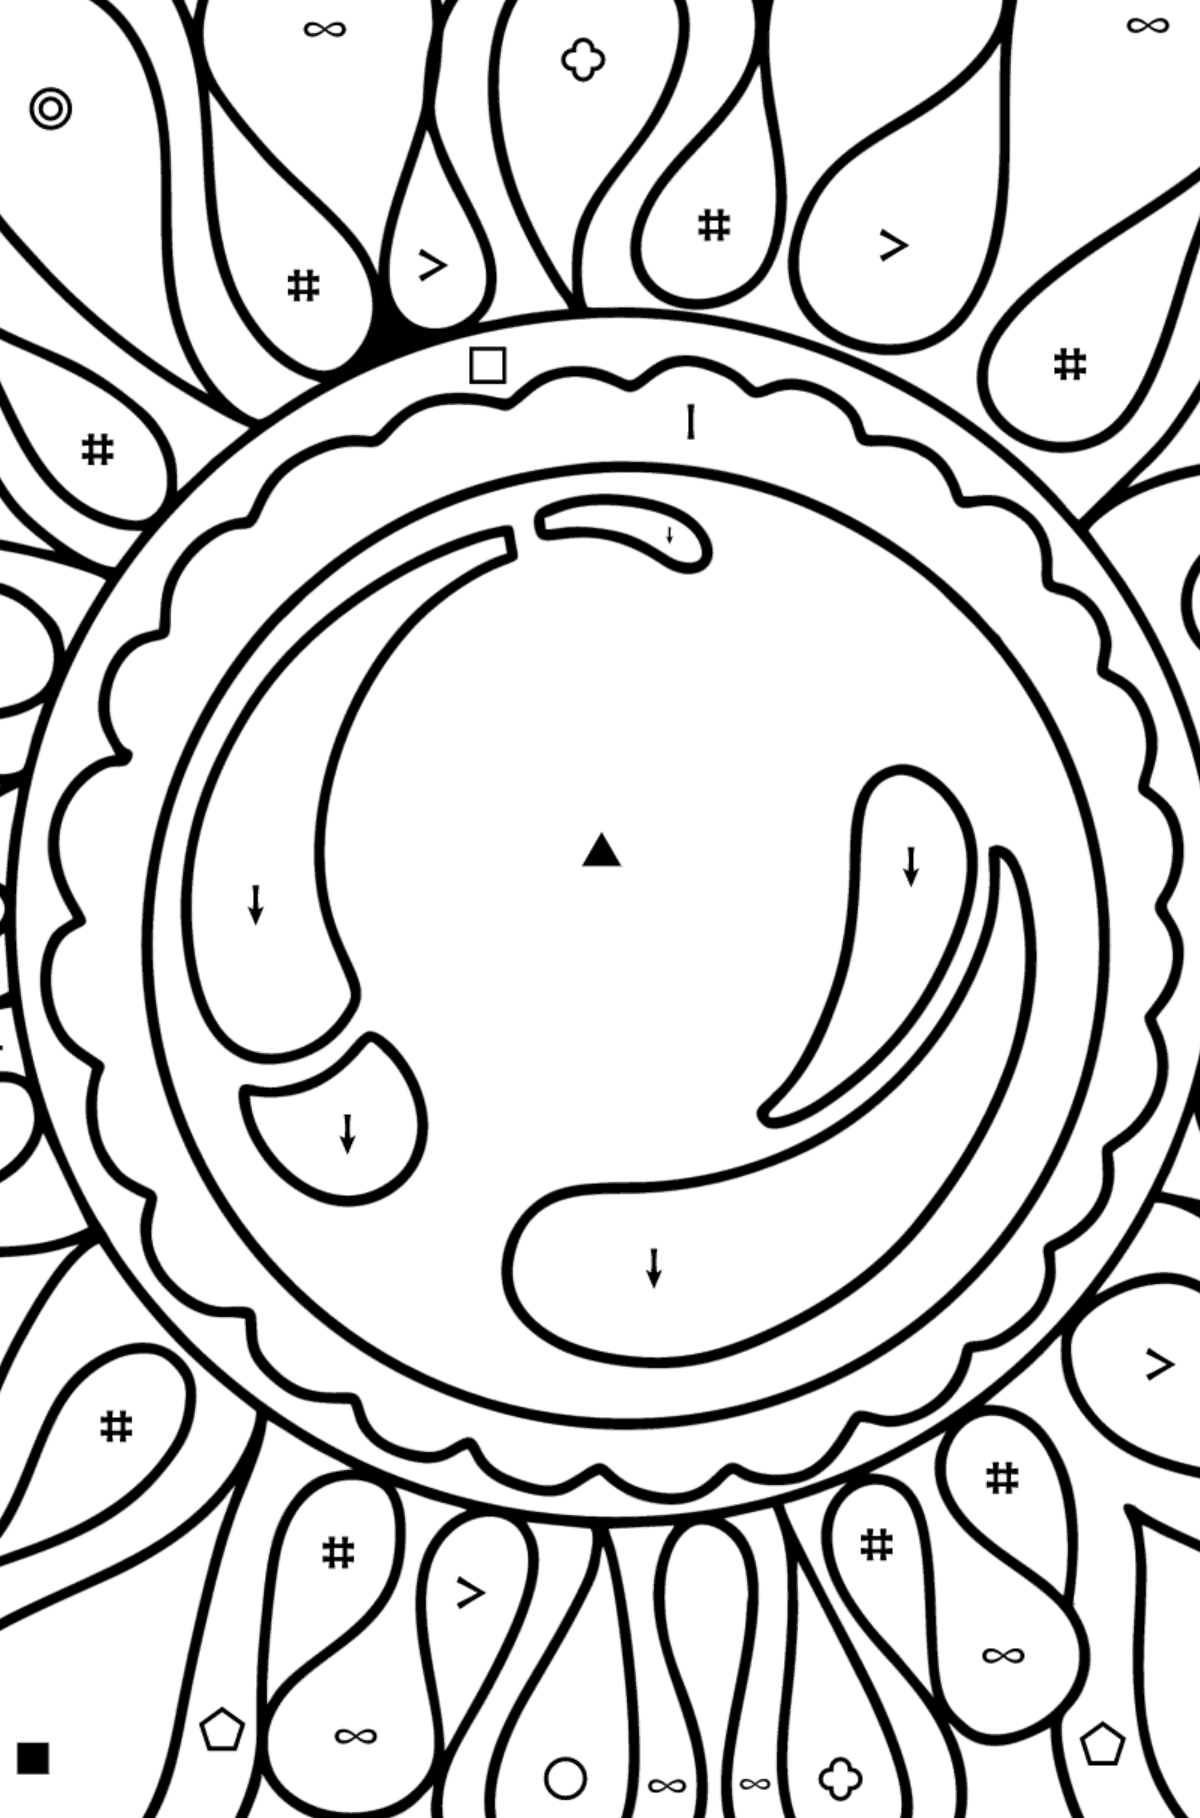 Zentangle Mirror coloring page - Coloring by Symbols and Geometric Shapes for Kids